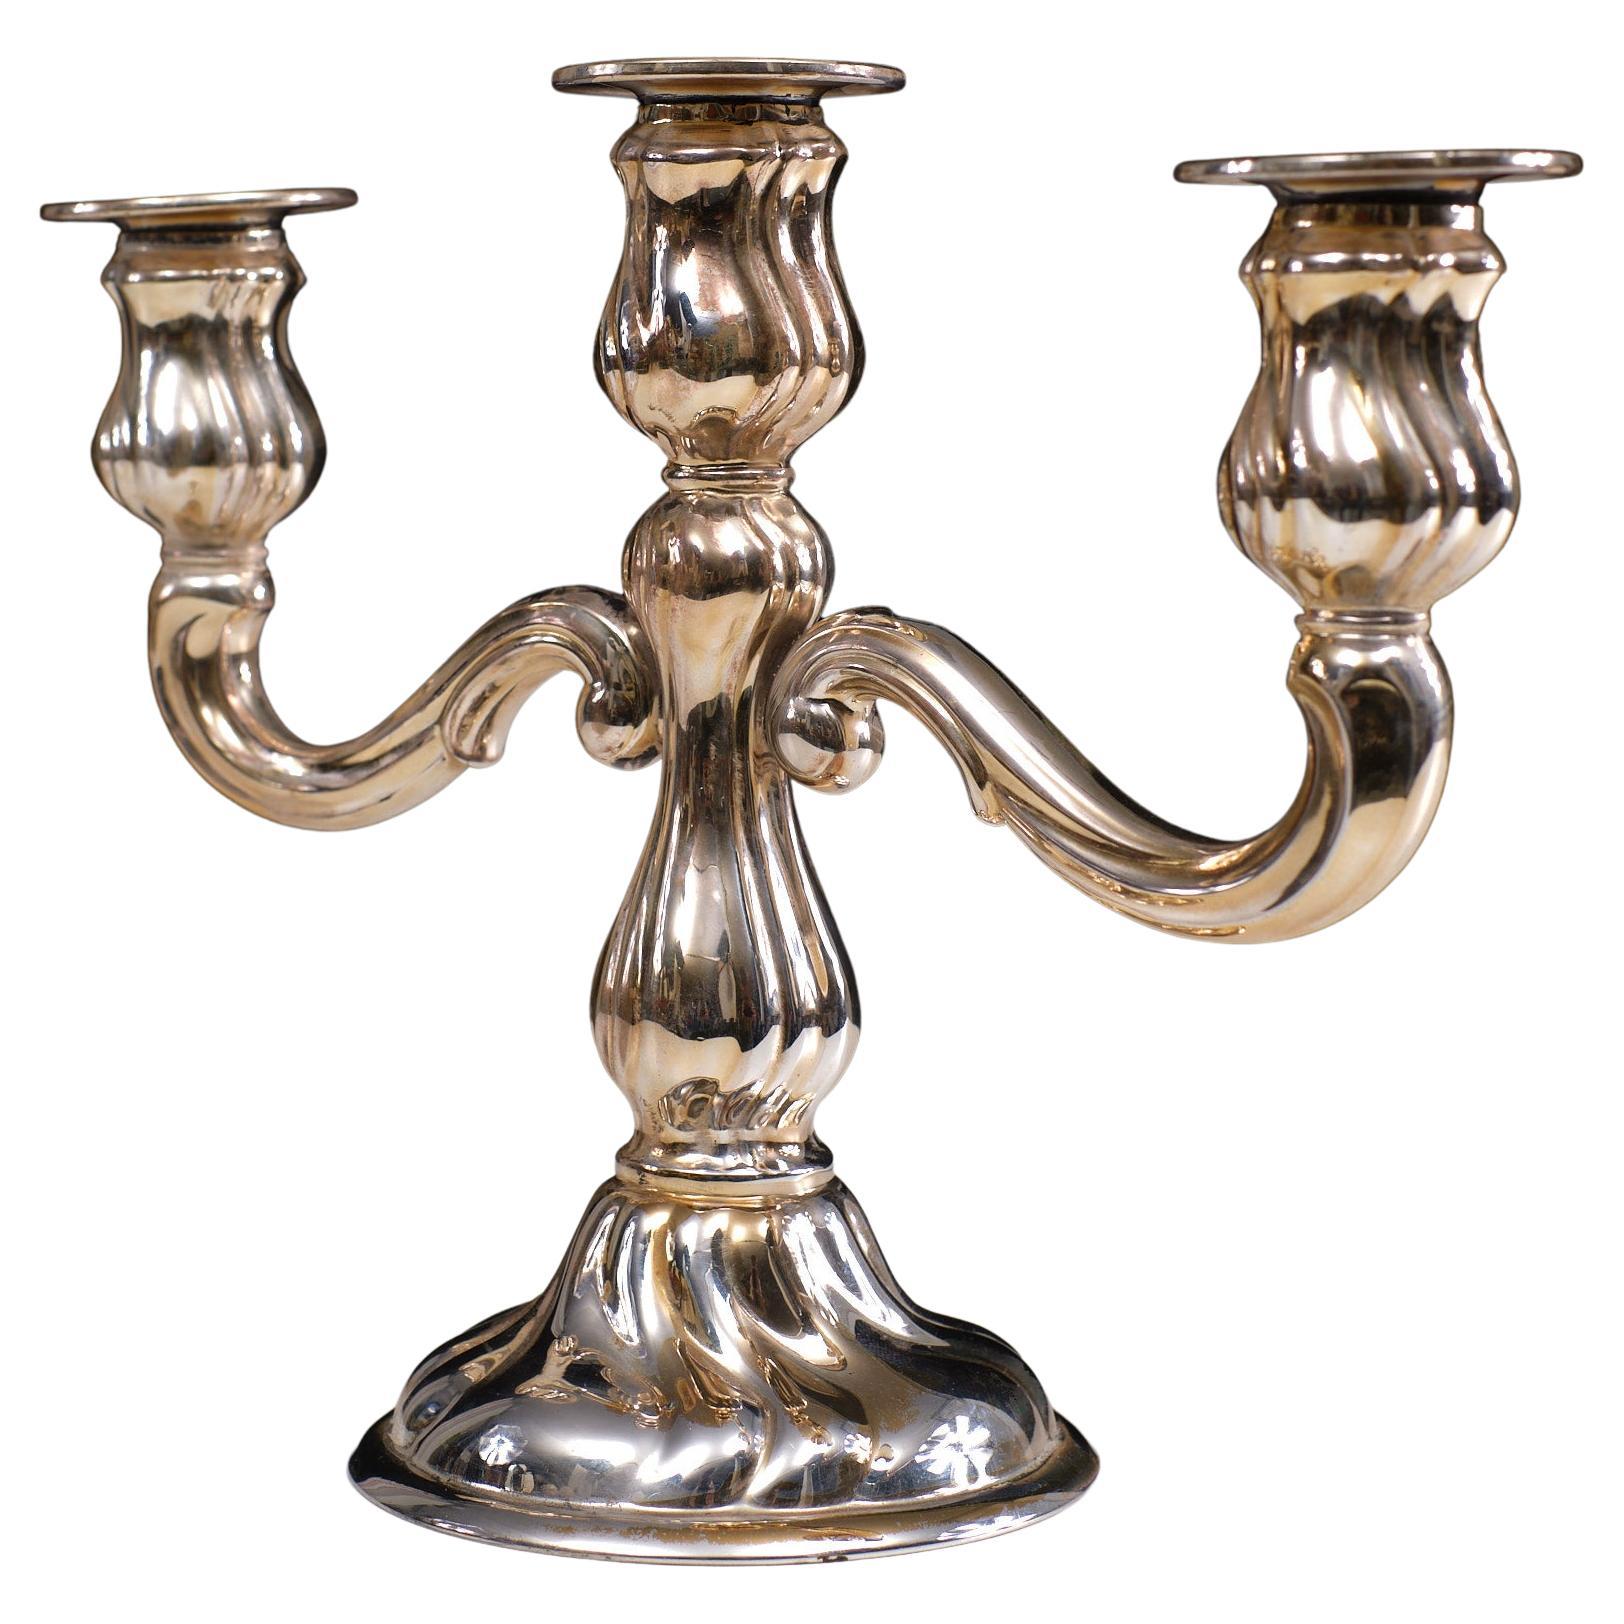 German real silver candelabra. Rococo style. Signed 1920s 3 separated candle wax holders.
needs a polish.